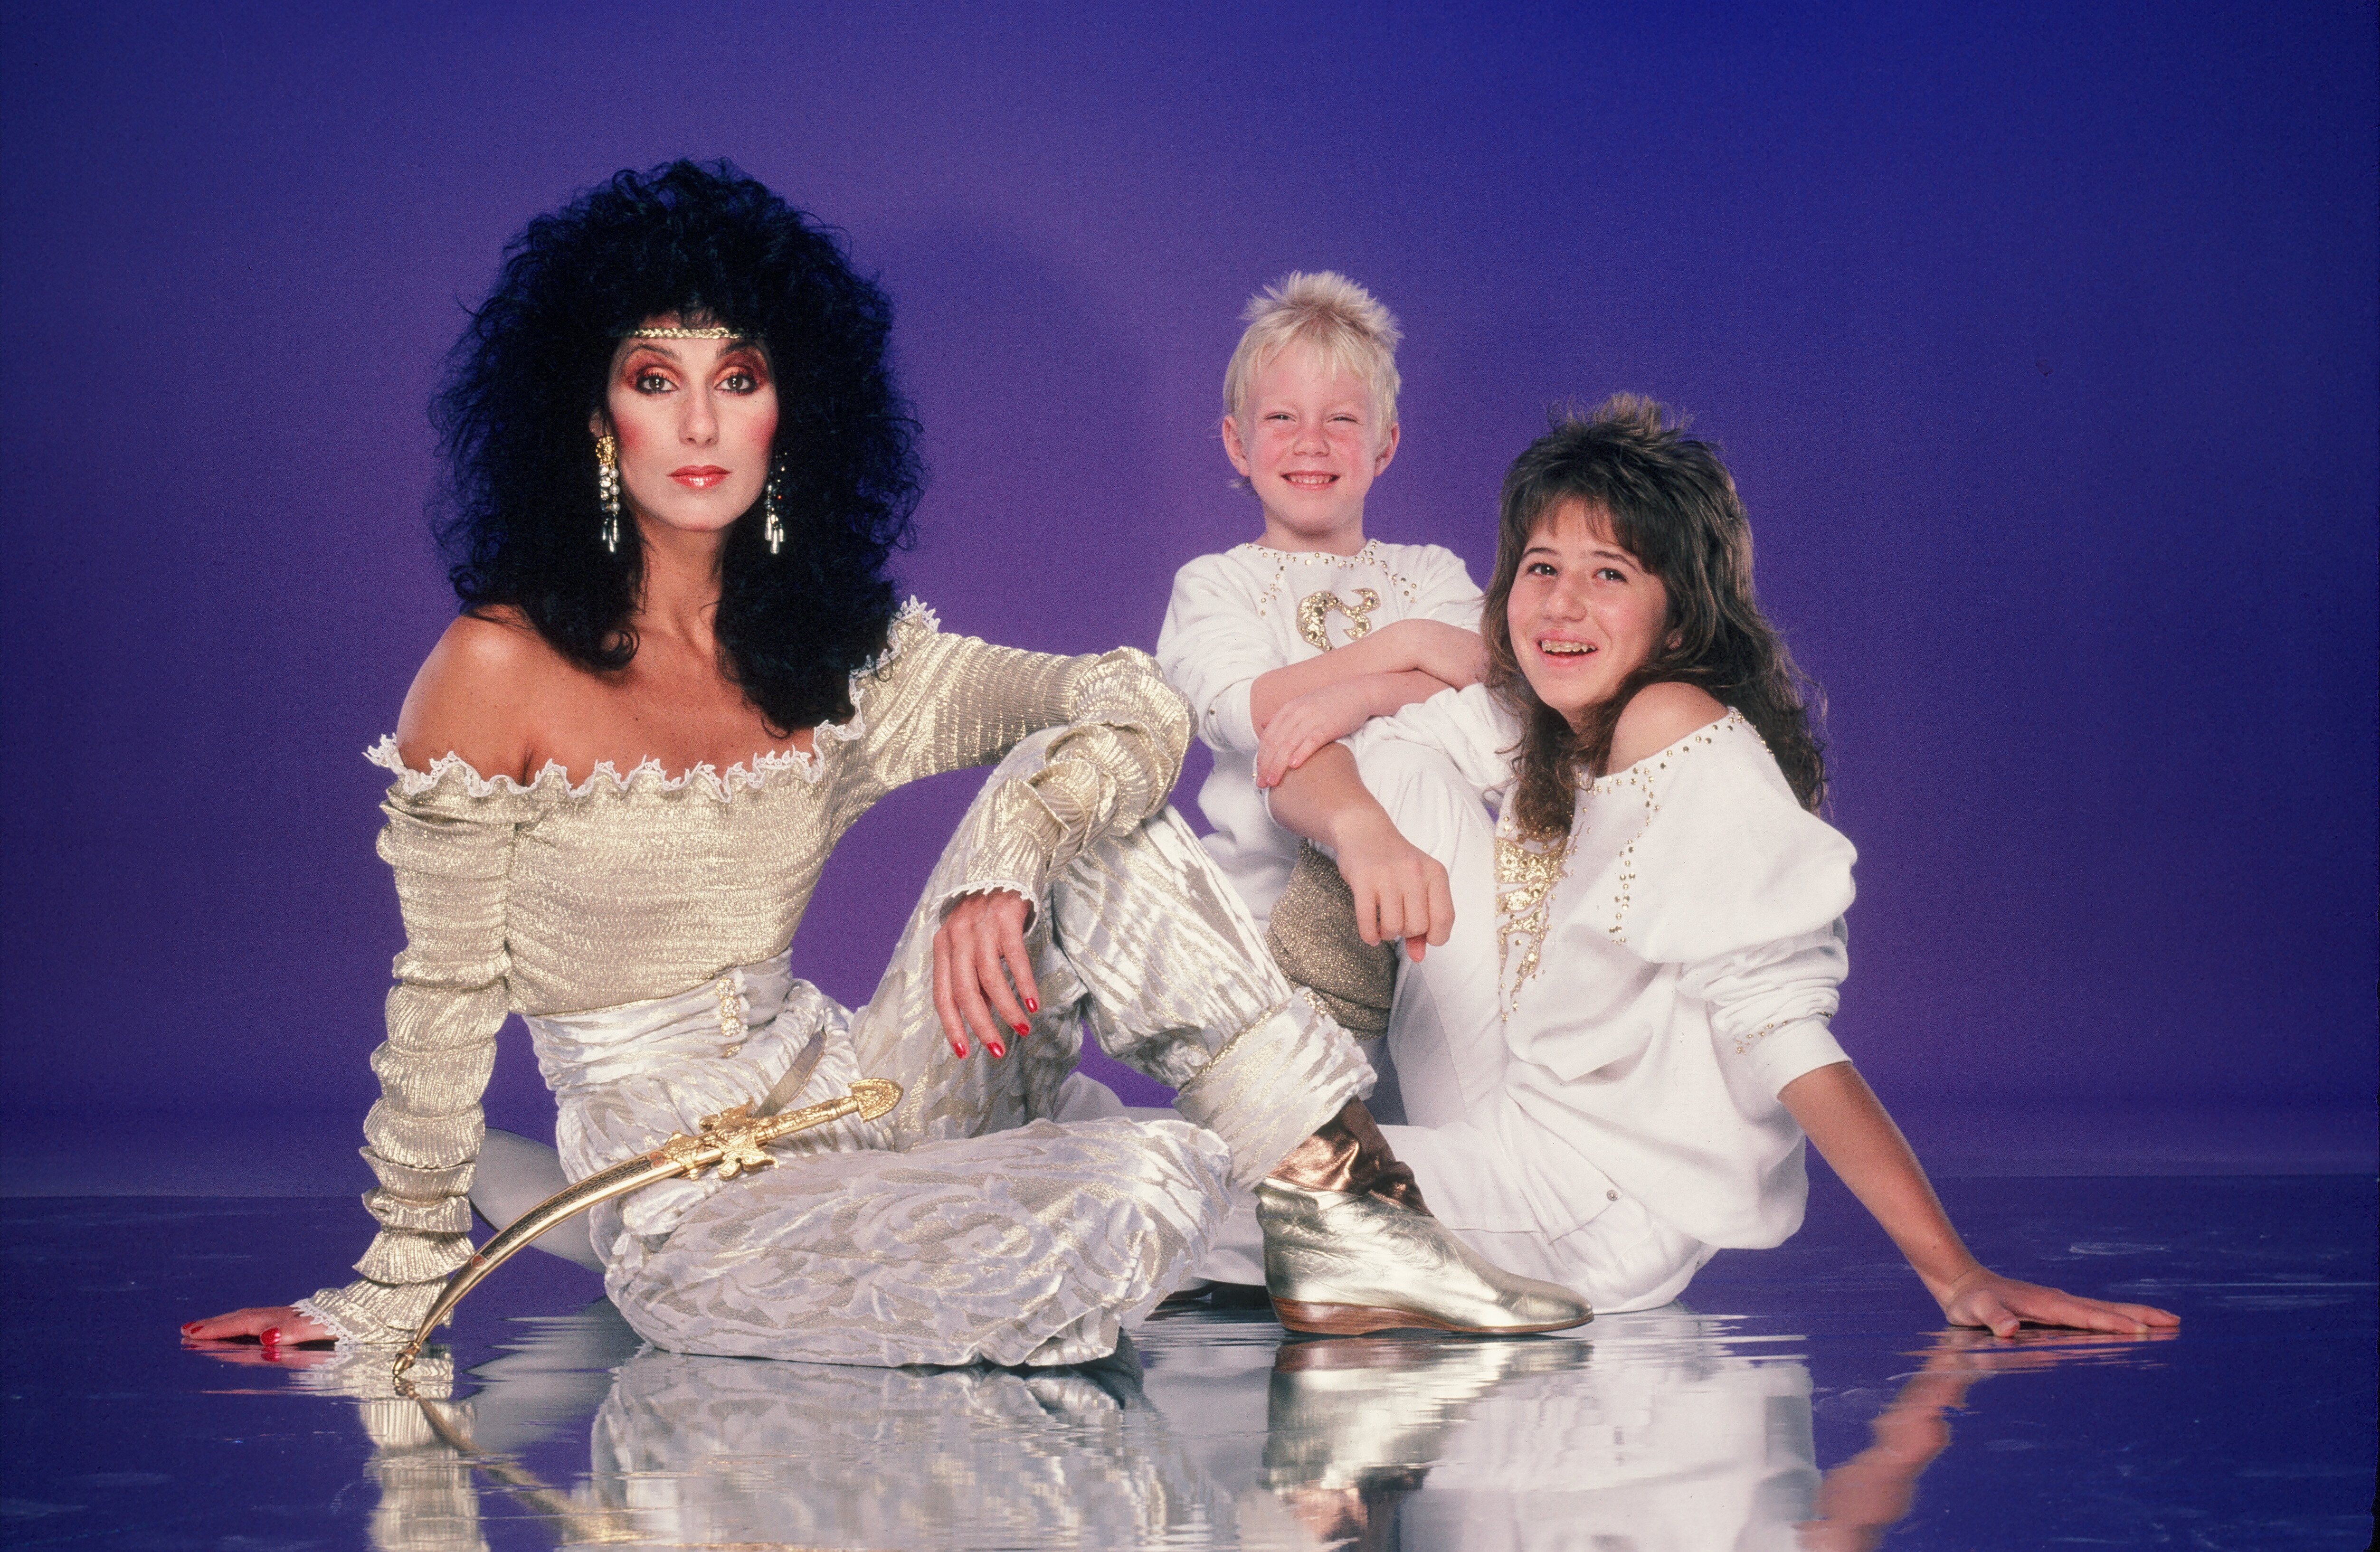 Cher, Chastity (Chaz) Bono, and Elijah Blue Allman in a photo session in June 1981 | Source: Getty Images